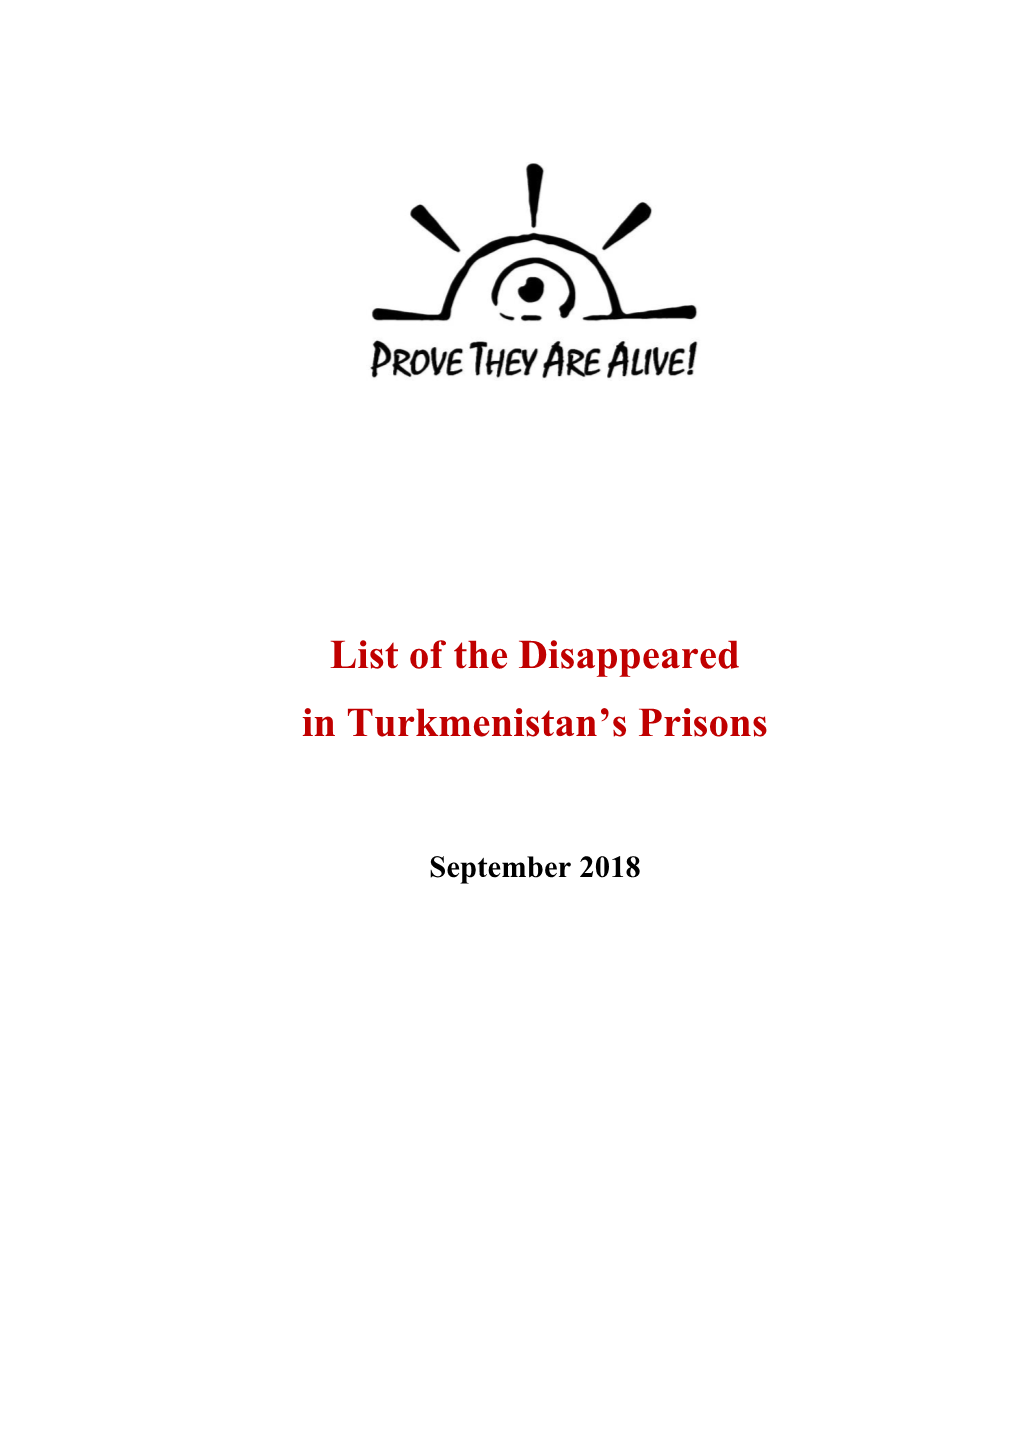 List of the Disappeared in Turkmenistan's Prisons, Based on Thorough Research, Including a Review of Available Documents and Independent Sources